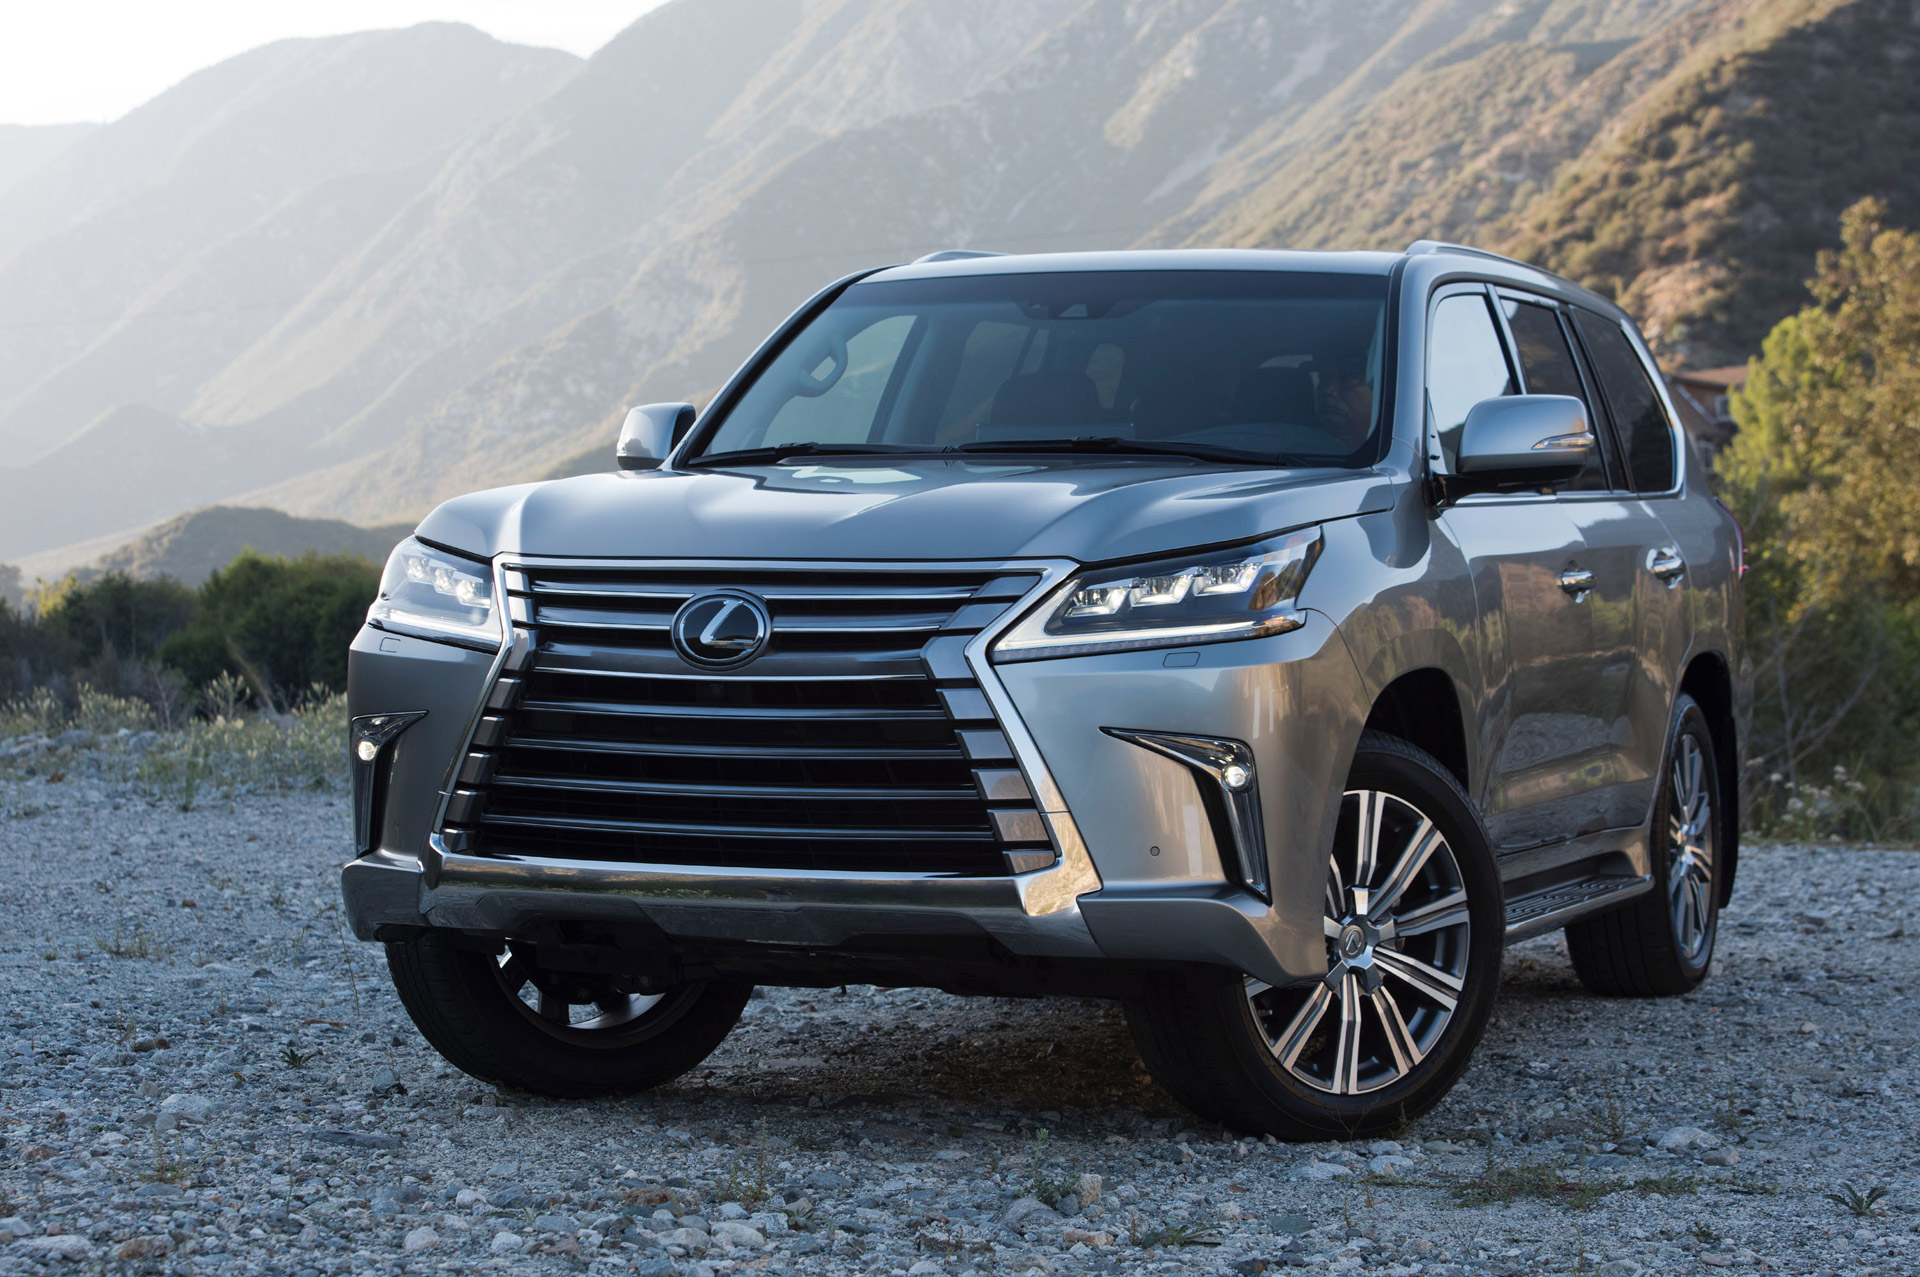 Free Images front view, cars, lexus lx 570 fl Suv